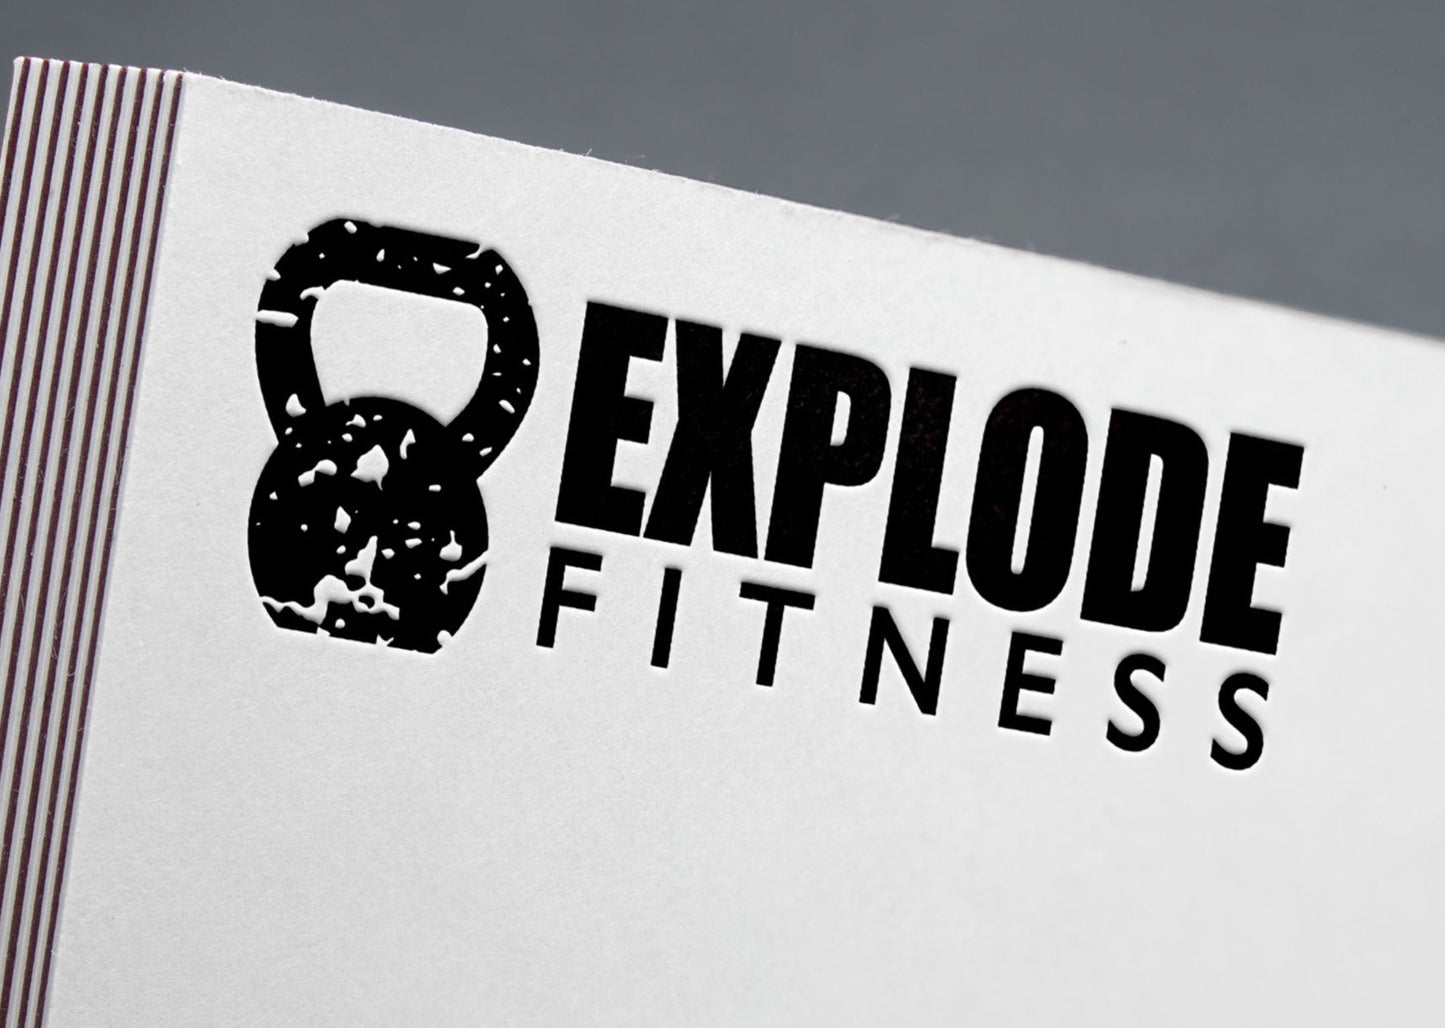 Personal Trainer Logo | Personal Trainer | Fitness Logo | Fitness Instructor | Gym Logo | Cross Fit | Kettle Bell Logo | Trainer Logo